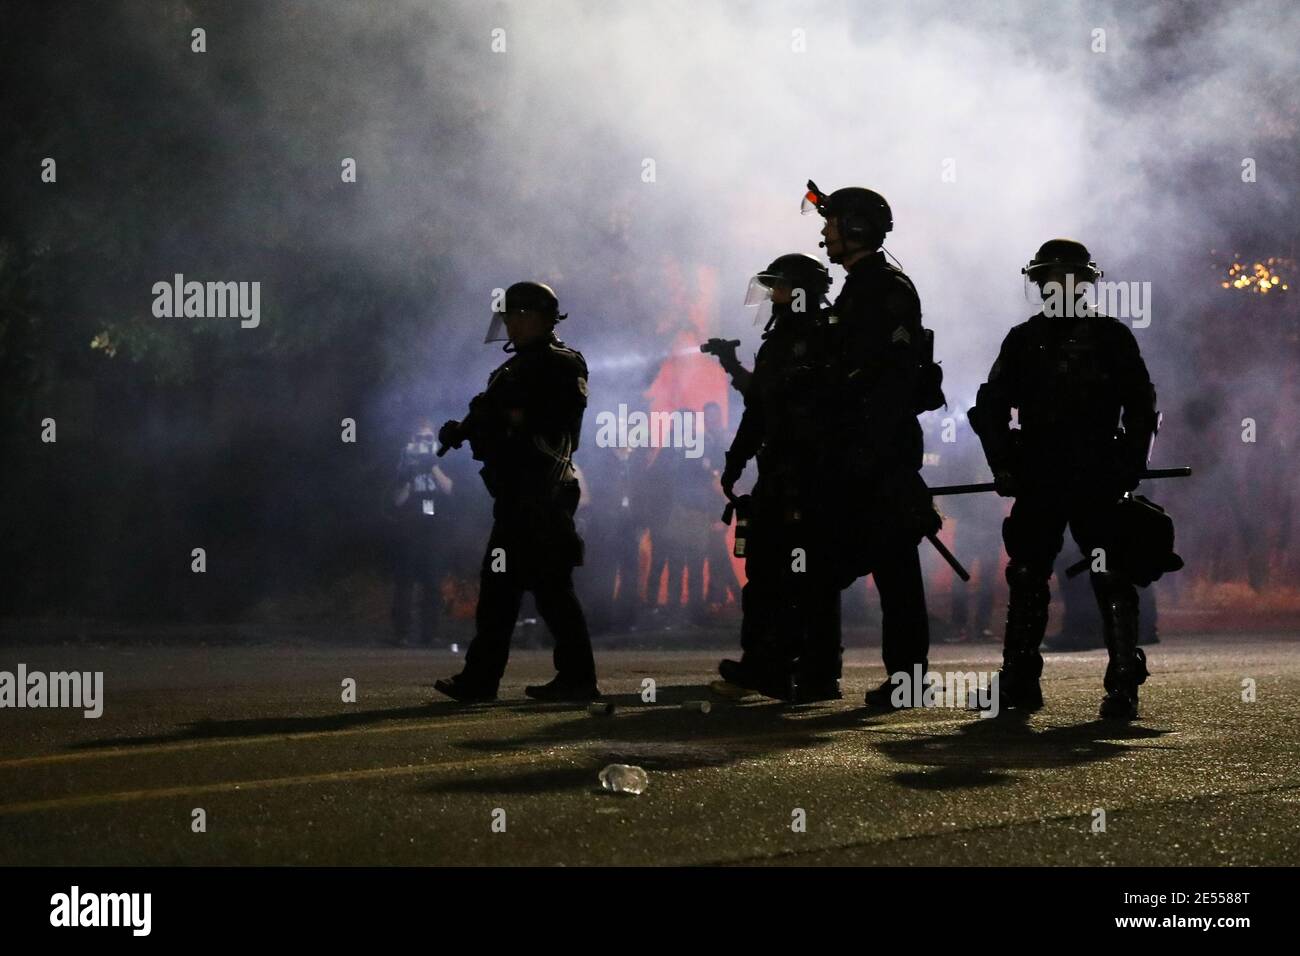 Portland Police officers disperse a crowd of protesters with CS gas on the 100th consecutive night of protests in Portland, Oregon, U.S. September 5, 2020. Picture taken September 5, 2020. REUTERS/Caitlin Ochs Stock Photo